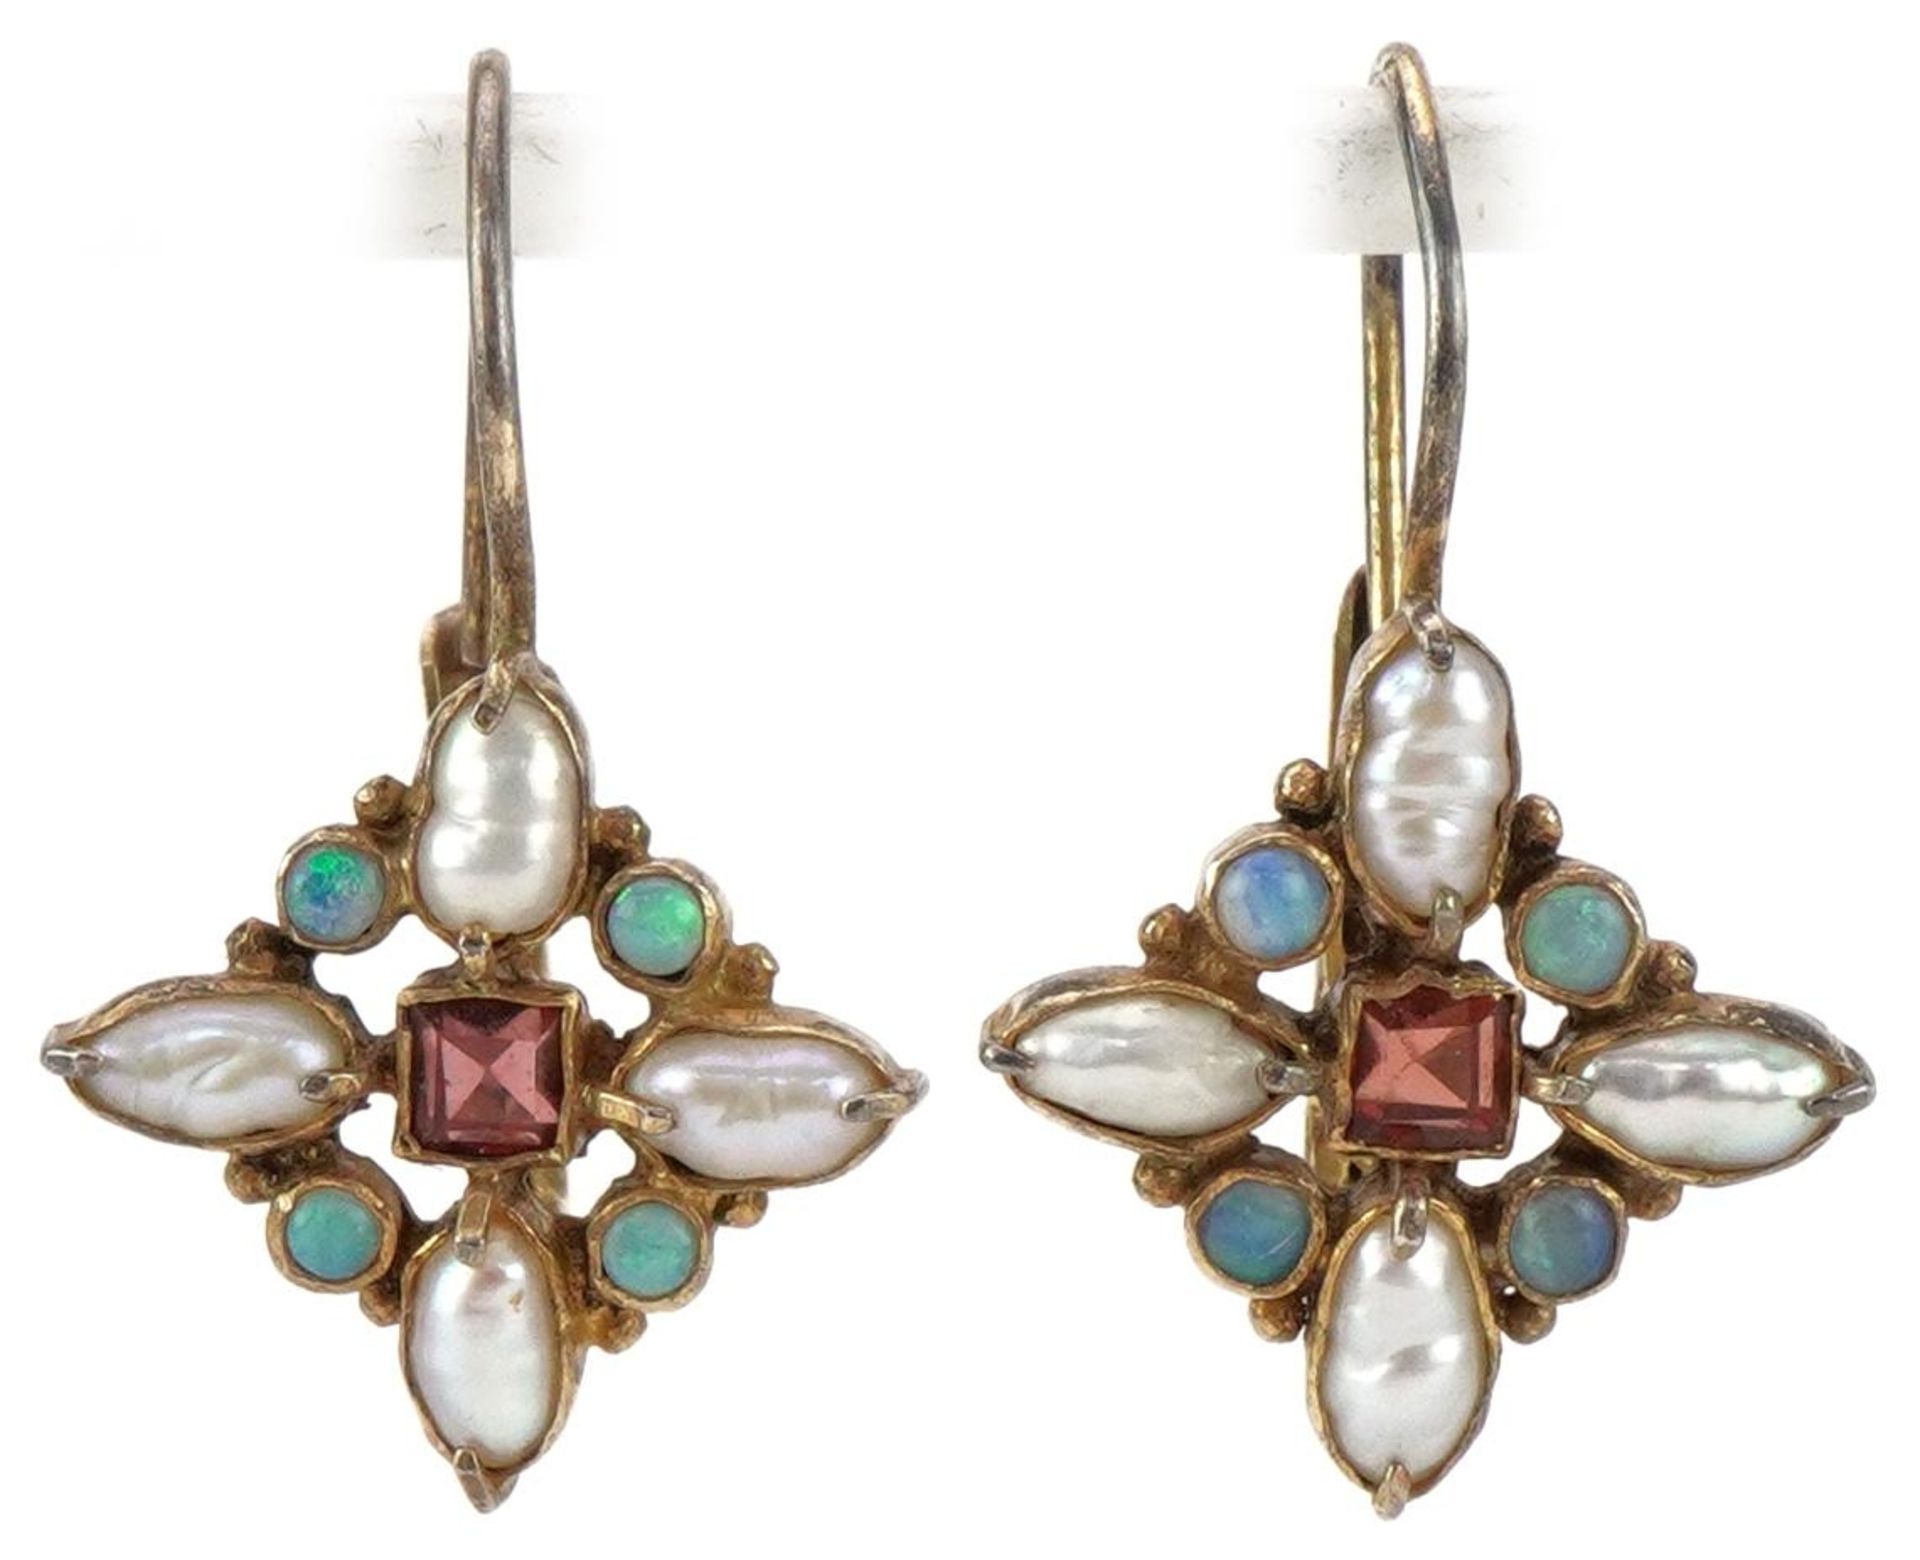 Pair of silver gilt multi gem earrings set with pearls, turquoise and garnets, possibly Austro-